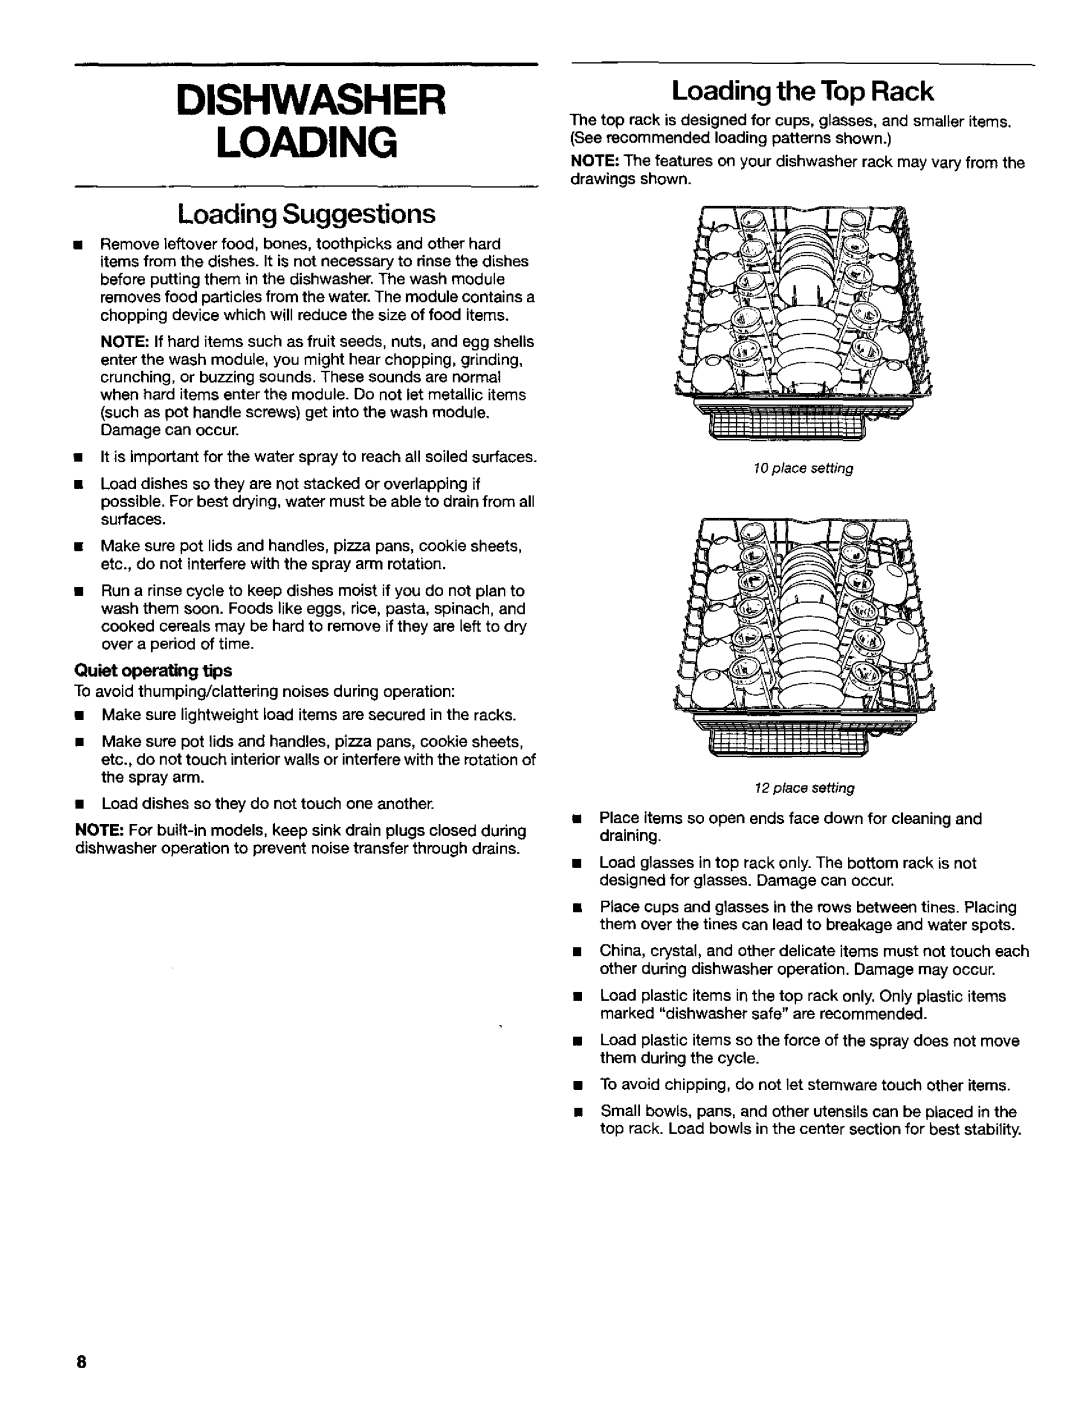 Kenmore 665.15737, 665.16734, 665.16739 manual Dishwasher Loading, Loading Suggestions, Loading the Top Rack, place setting 